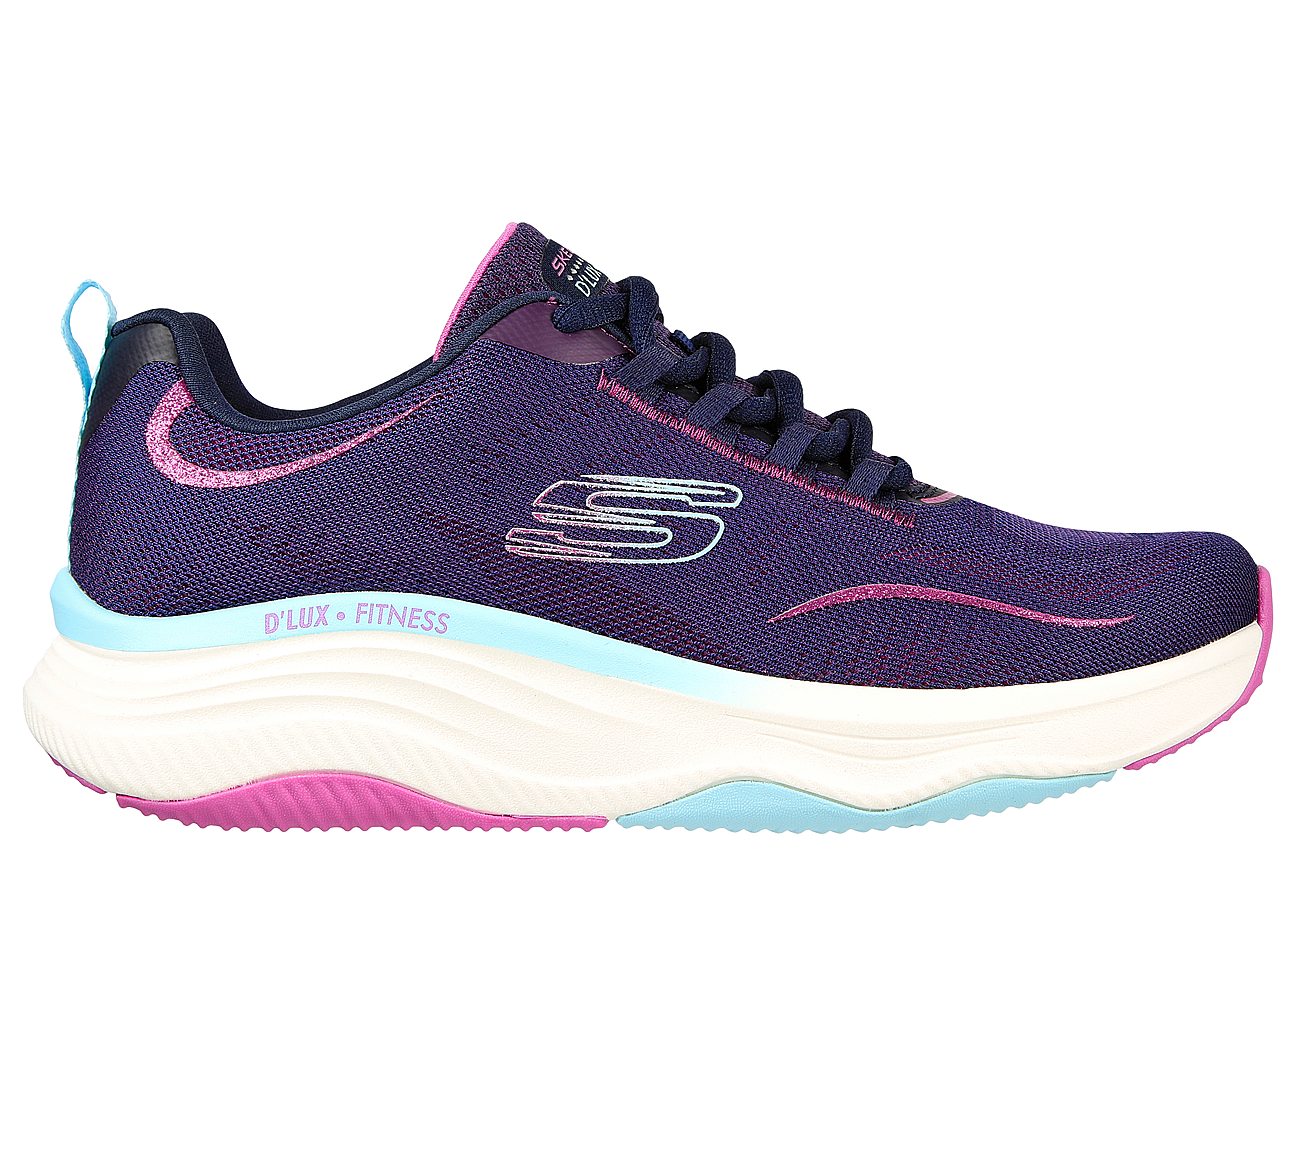 D'LUX FITNESS, NAVY/MULTI Footwear Right View